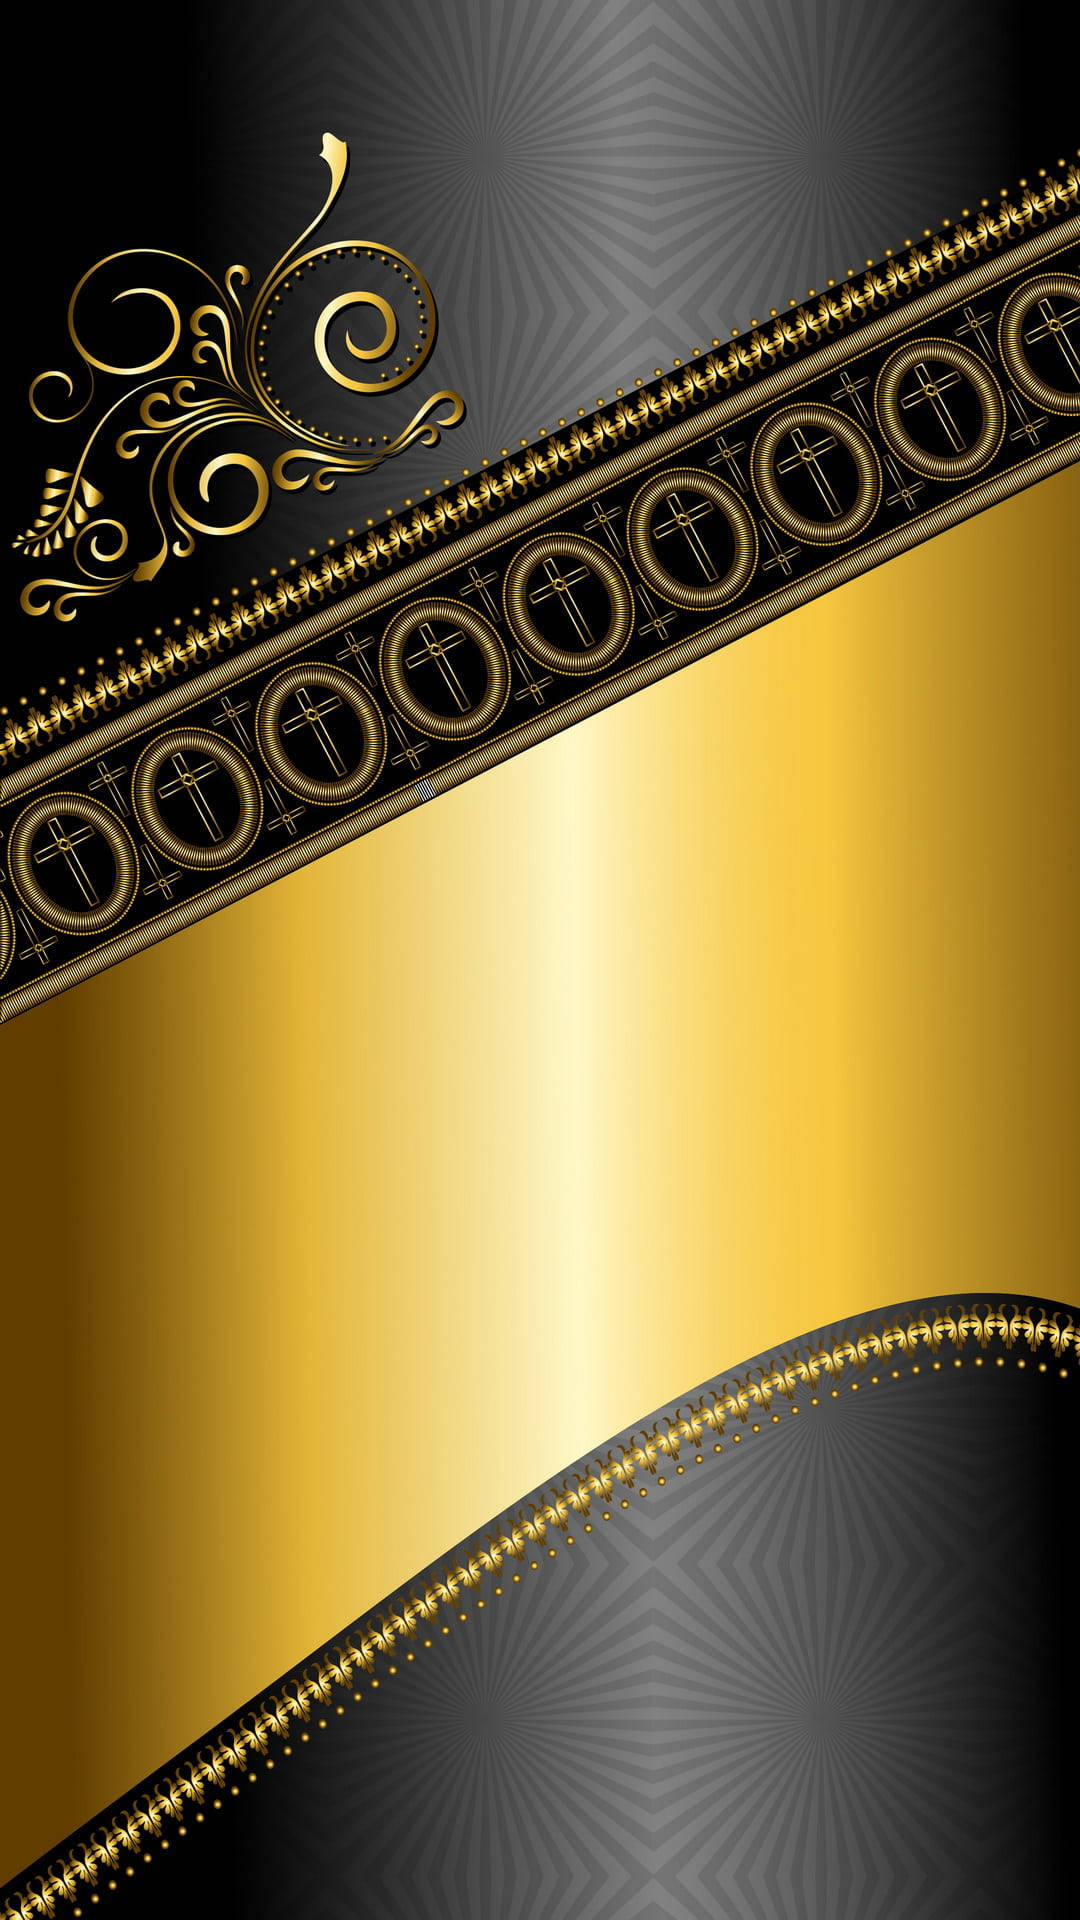 Elegance Personified With Iphone 12 Pro Max In Gold Background